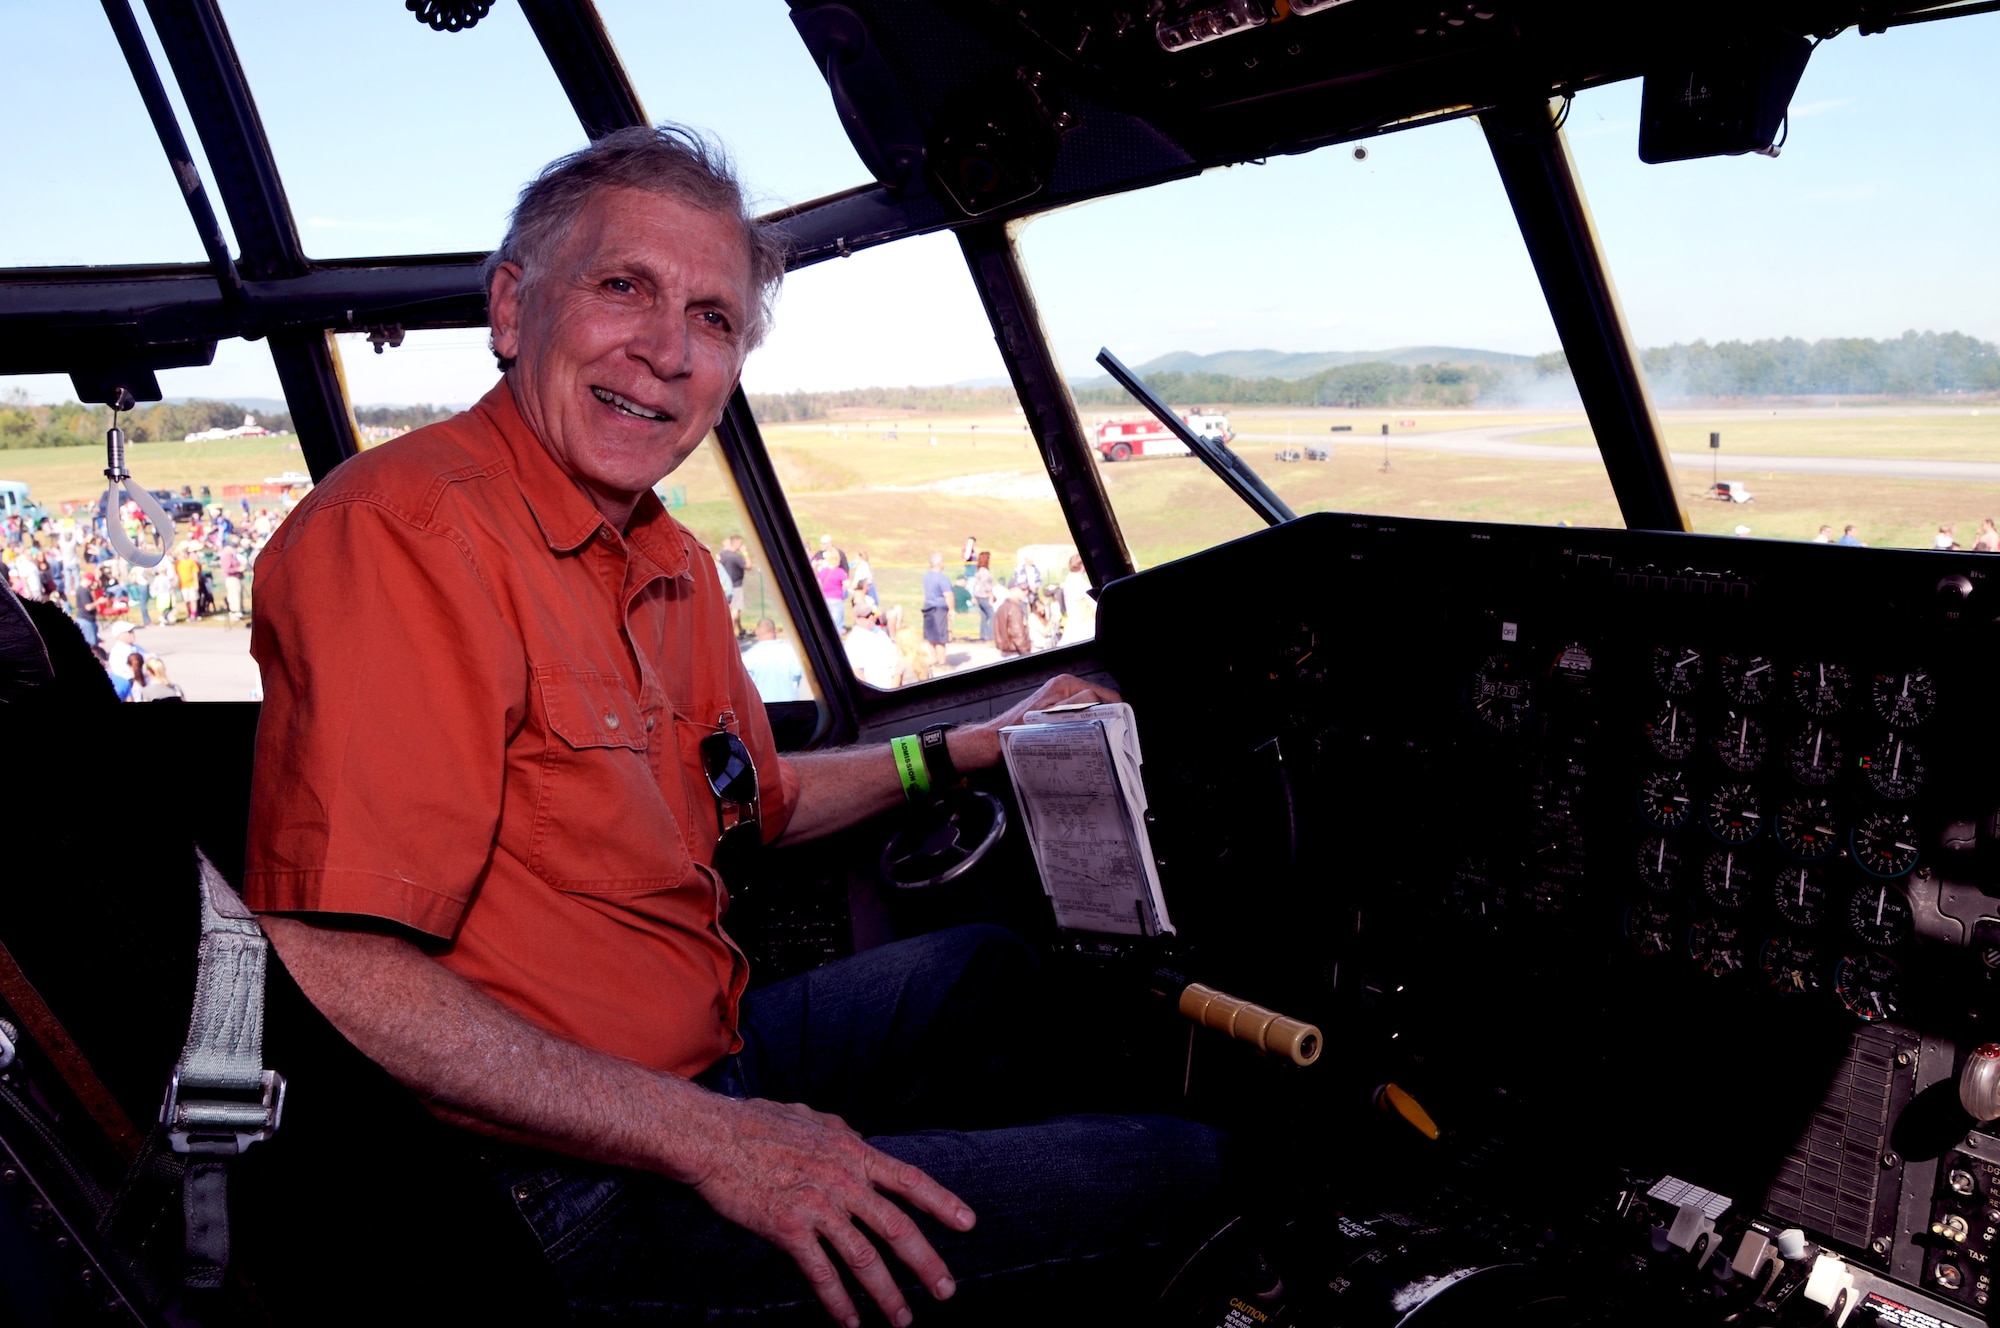 Brian Shuler, a Marietta, Ga. resident and former C-130 crew member, poses for a photo in the static U.S. Force C-130 Hercules from Dobbins Air Reserve Base at the Wings over North Georgia air show in Rome, Ga, Oct. 18, 2014. The 700th Airlift Squadron brought a U.S. Air Force C-130 Hercules to the WONG air show as a static display. (U.S. Air Force photo by Senior Airman Daniel Phelps/Released)